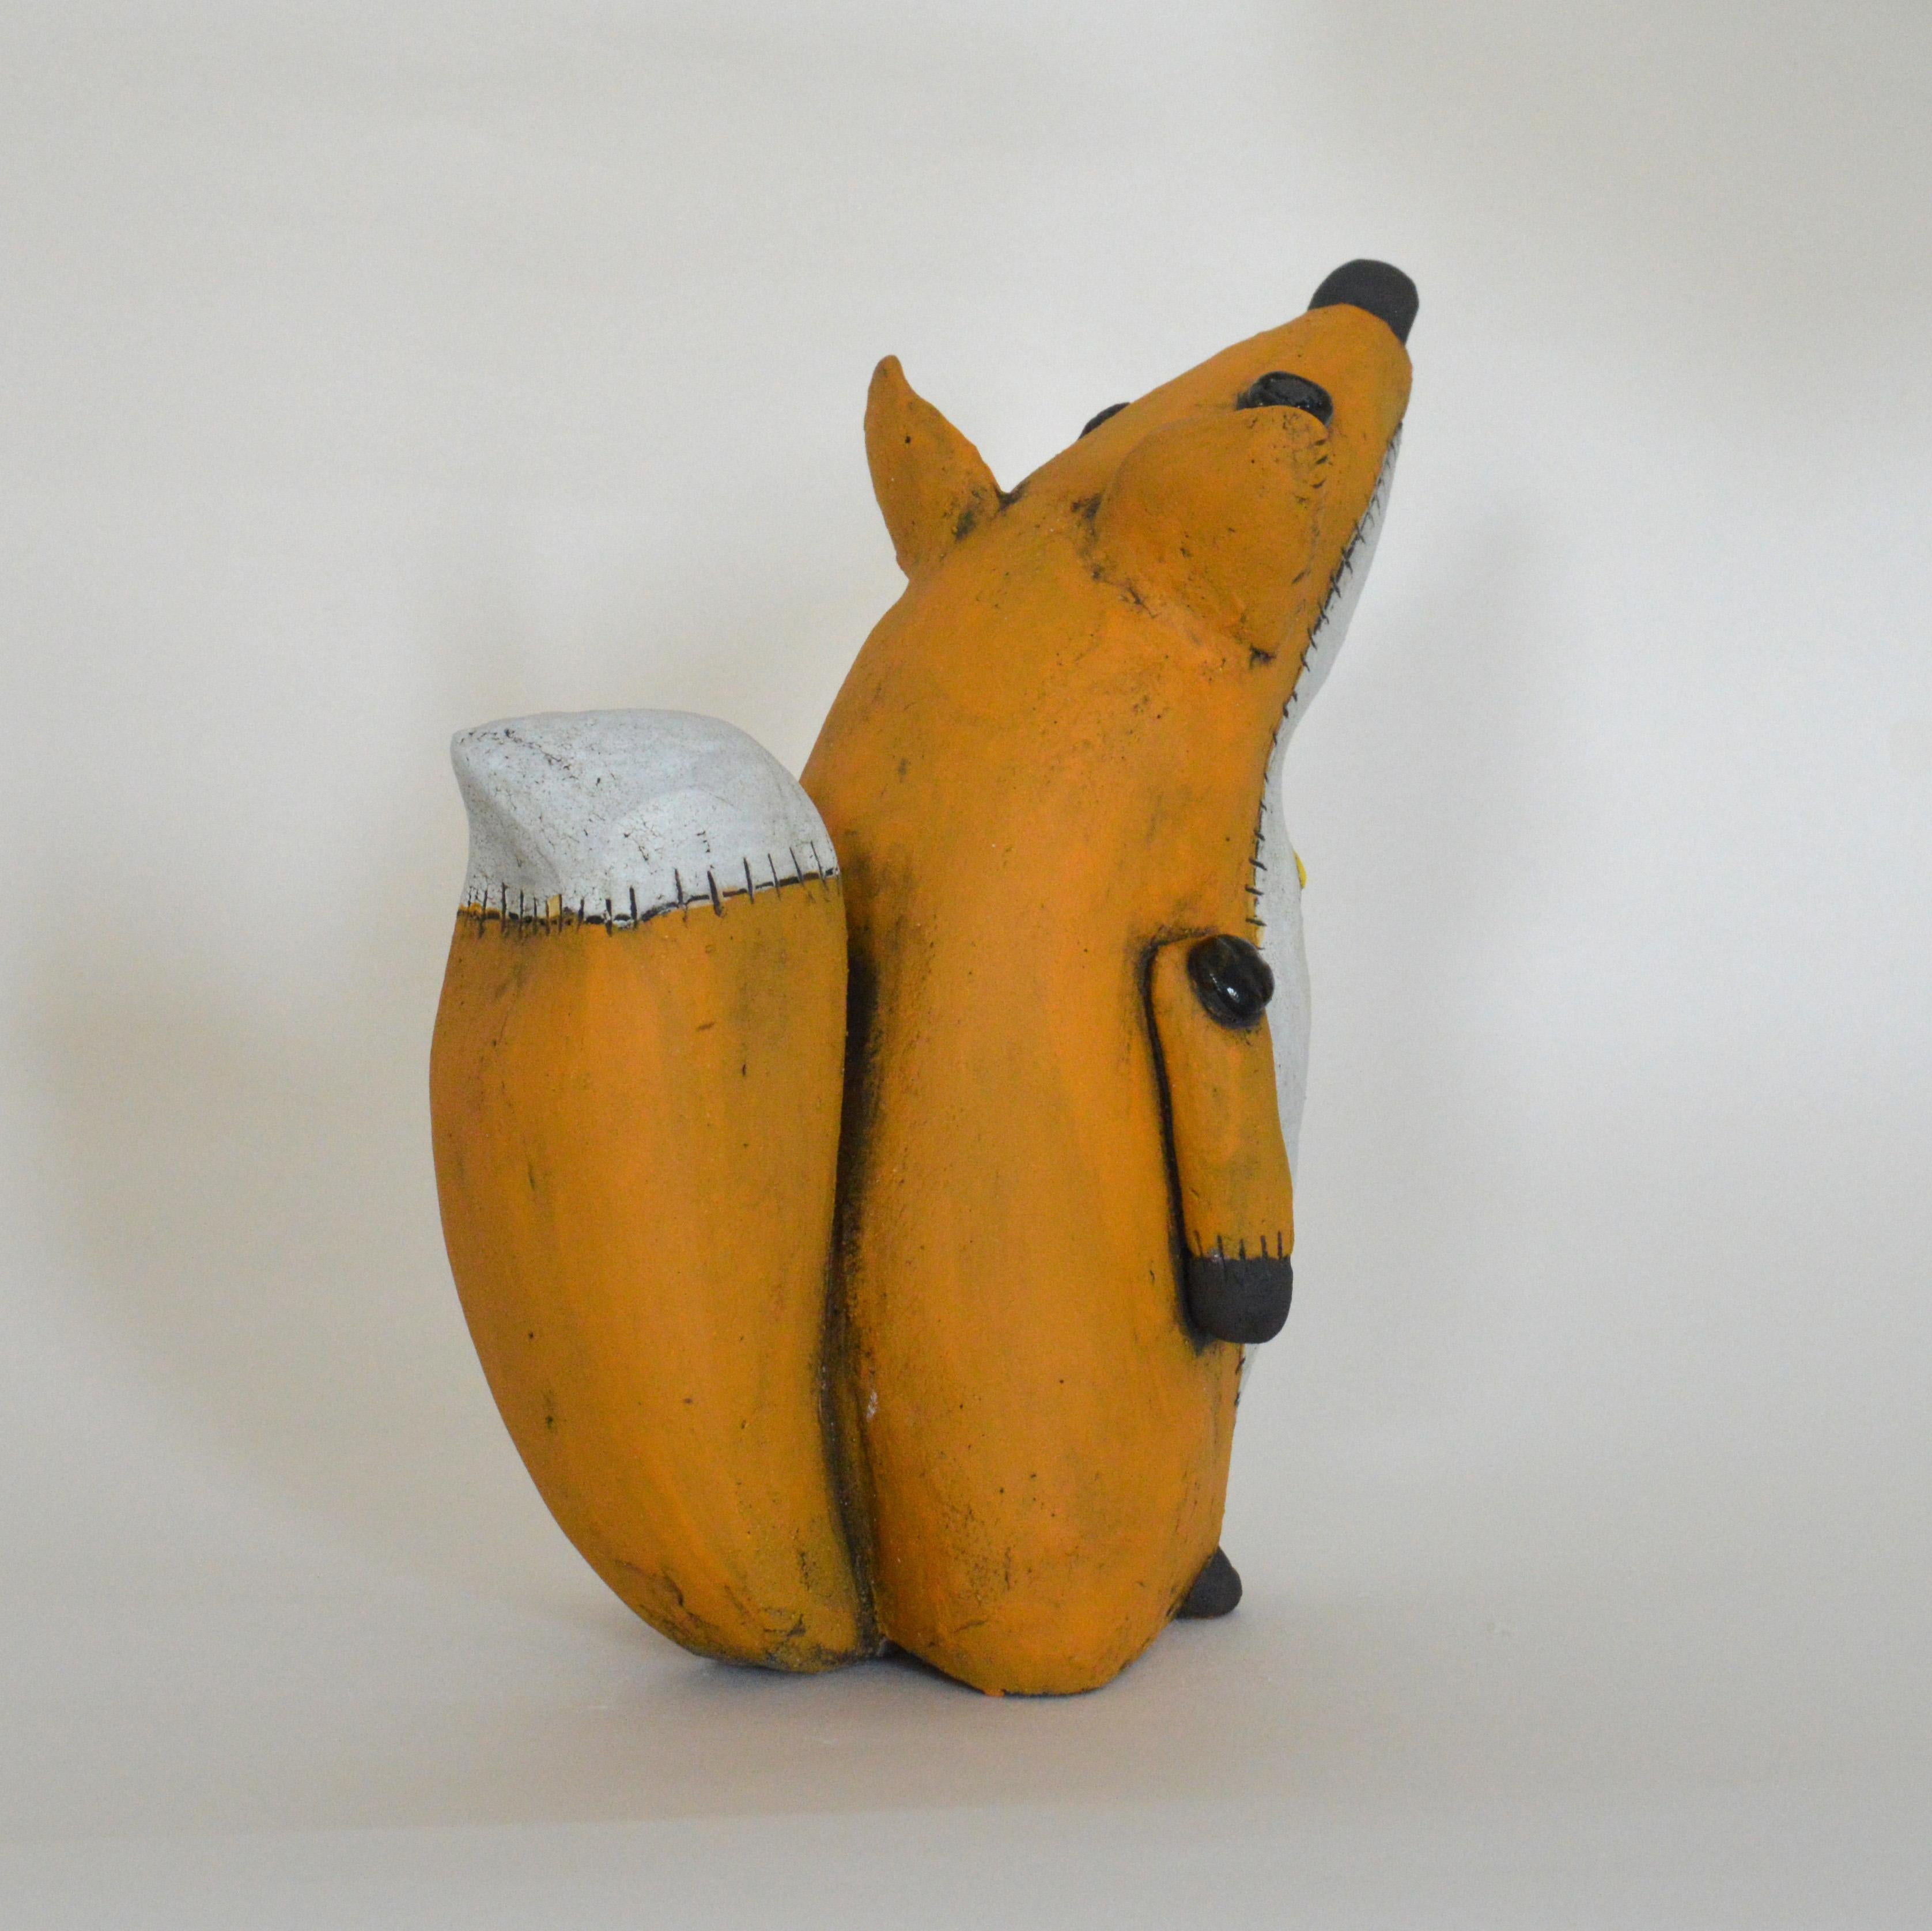 This charming sculpture, created by artist Renate Frotscher in her Cantal-based atelier, captures the whimsy of the beloved Little Prince disguised as a fox. Crafted with meticulous attention to detail, the sculpture exudes a playful and endearing